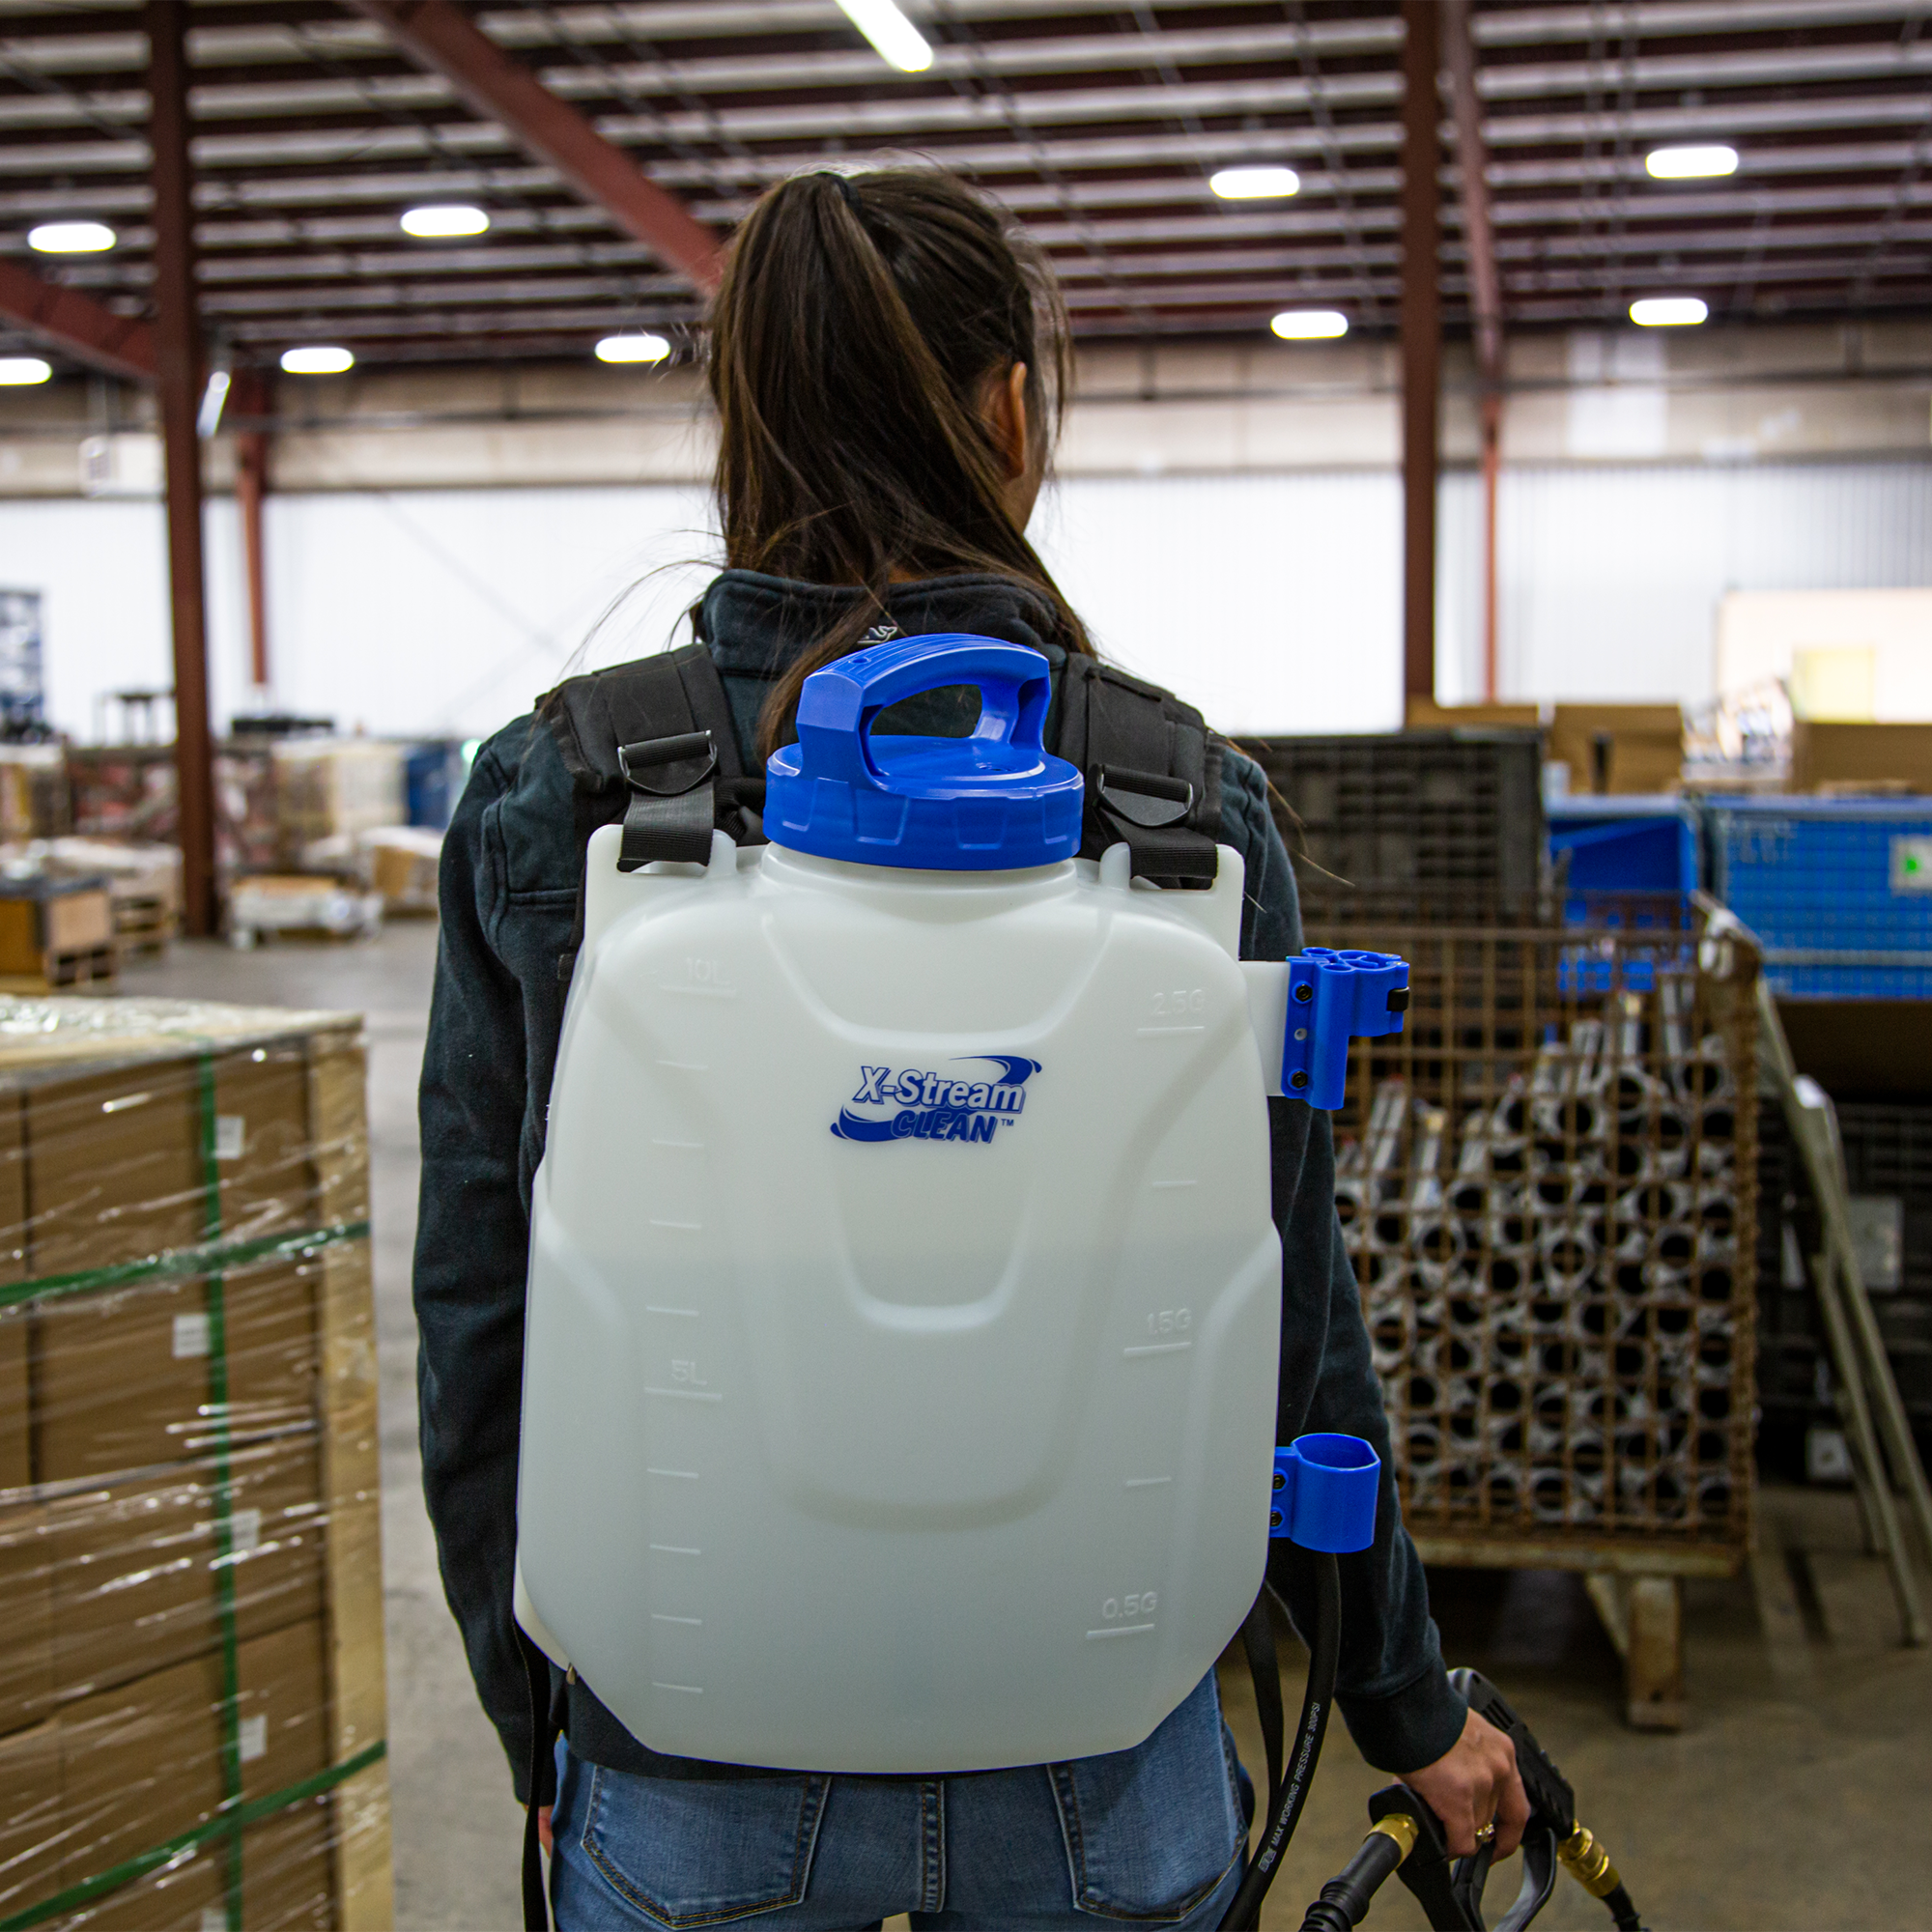 X-Stream Clean 2.5-Gallon Cleaning and  Sanitation Backpack Sprayer on in a warehouse 